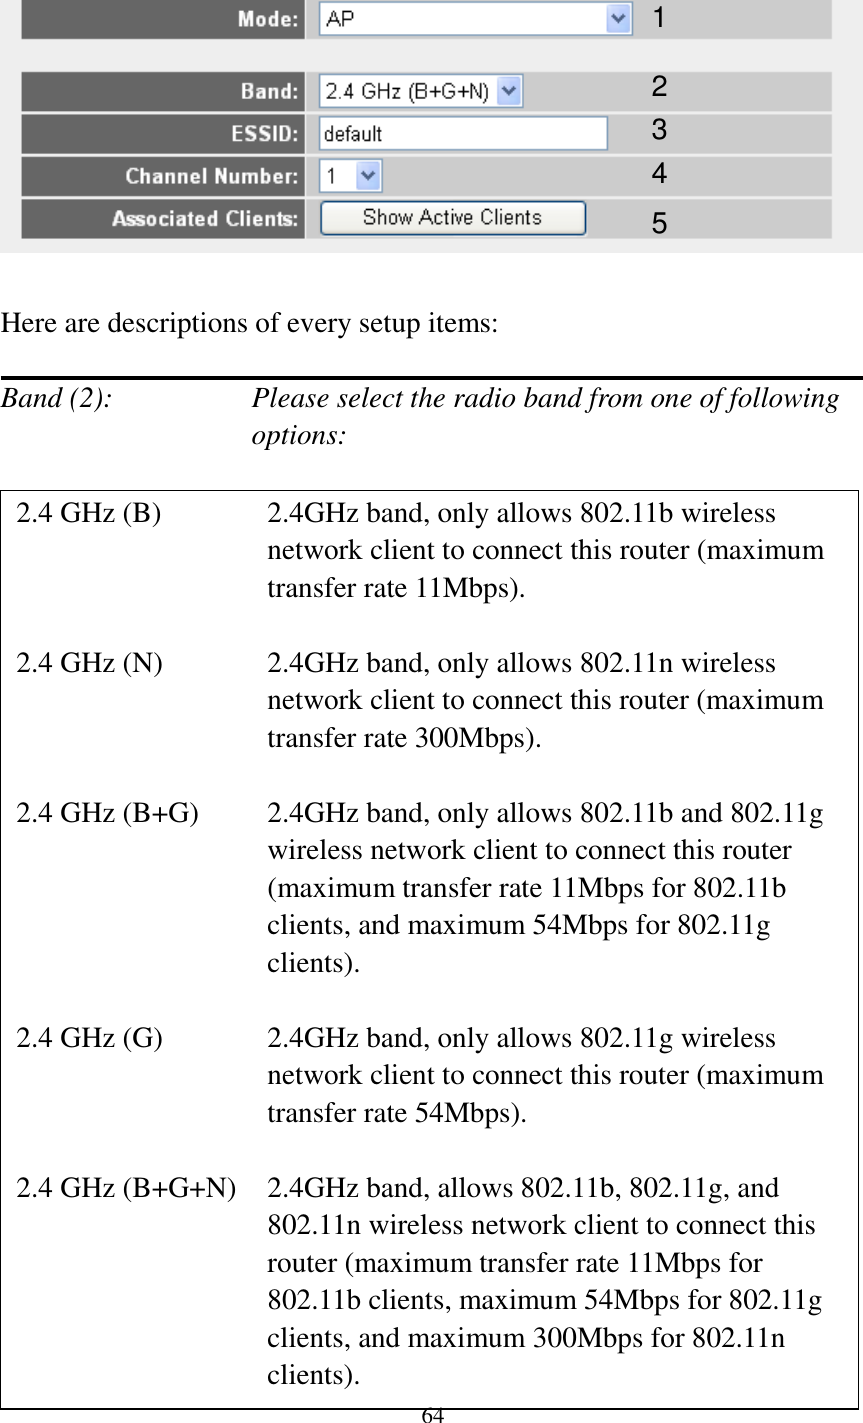 64    Here are descriptions of every setup items:  Band (2):    Please select the radio band from one of following options:                         1 2 3 4 2.4 GHz (B)  2.4GHz band, only allows 802.11b wireless network client to connect this router (maximum transfer rate 11Mbps).  2.4 GHz (N)  2.4GHz band, only allows 802.11n wireless network client to connect this router (maximum transfer rate 300Mbps).  2.4 GHz (B+G)    2.4GHz band, only allows 802.11b and 802.11g wireless network client to connect this router (maximum transfer rate 11Mbps for 802.11b clients, and maximum 54Mbps for 802.11g clients).  2.4 GHz (G)    2.4GHz band, only allows 802.11g wireless network client to connect this router (maximum transfer rate 54Mbps).  2.4 GHz (B+G+N)    2.4GHz band, allows 802.11b, 802.11g, and 802.11n wireless network client to connect this router (maximum transfer rate 11Mbps for 802.11b clients, maximum 54Mbps for 802.11g clients, and maximum 300Mbps for 802.11n clients).   5 